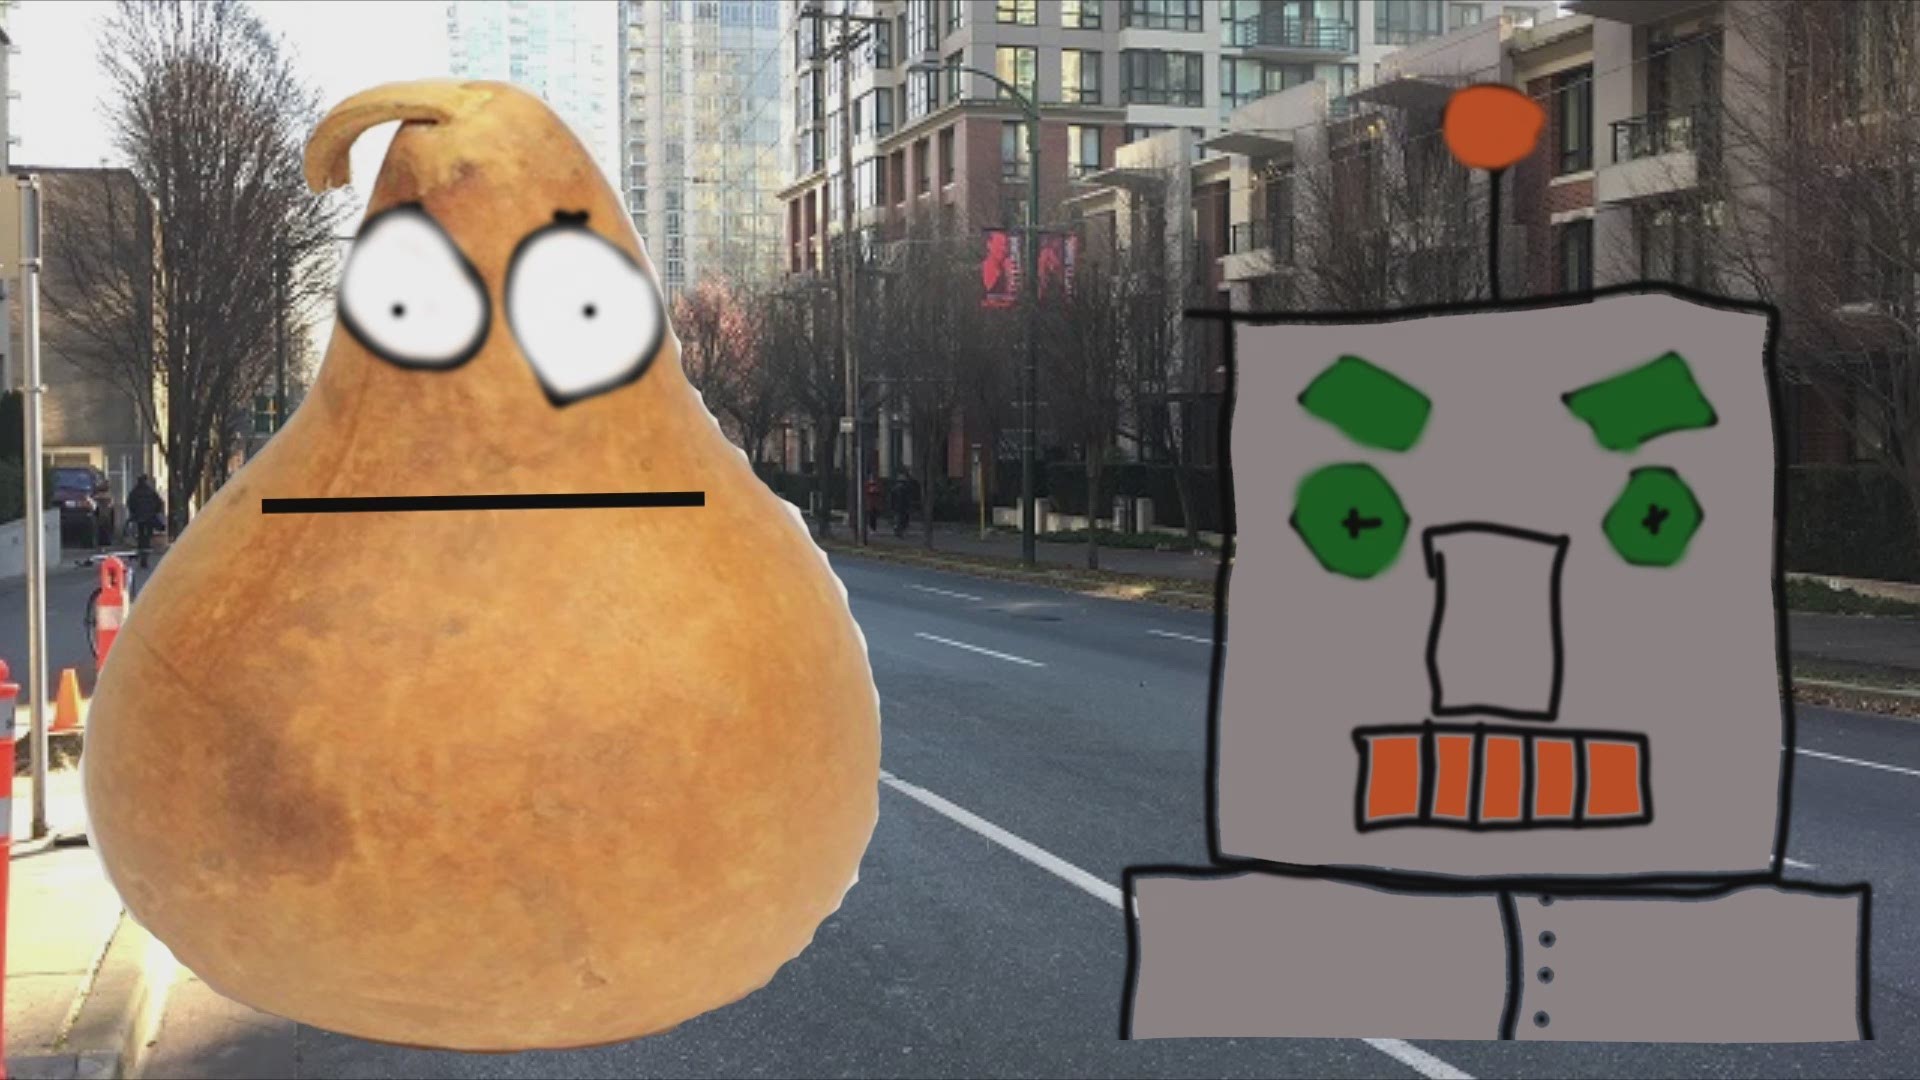 Student produced film from the DATA program at Squeaky Wheel: Sean Szucs' Robo and Gourdy.